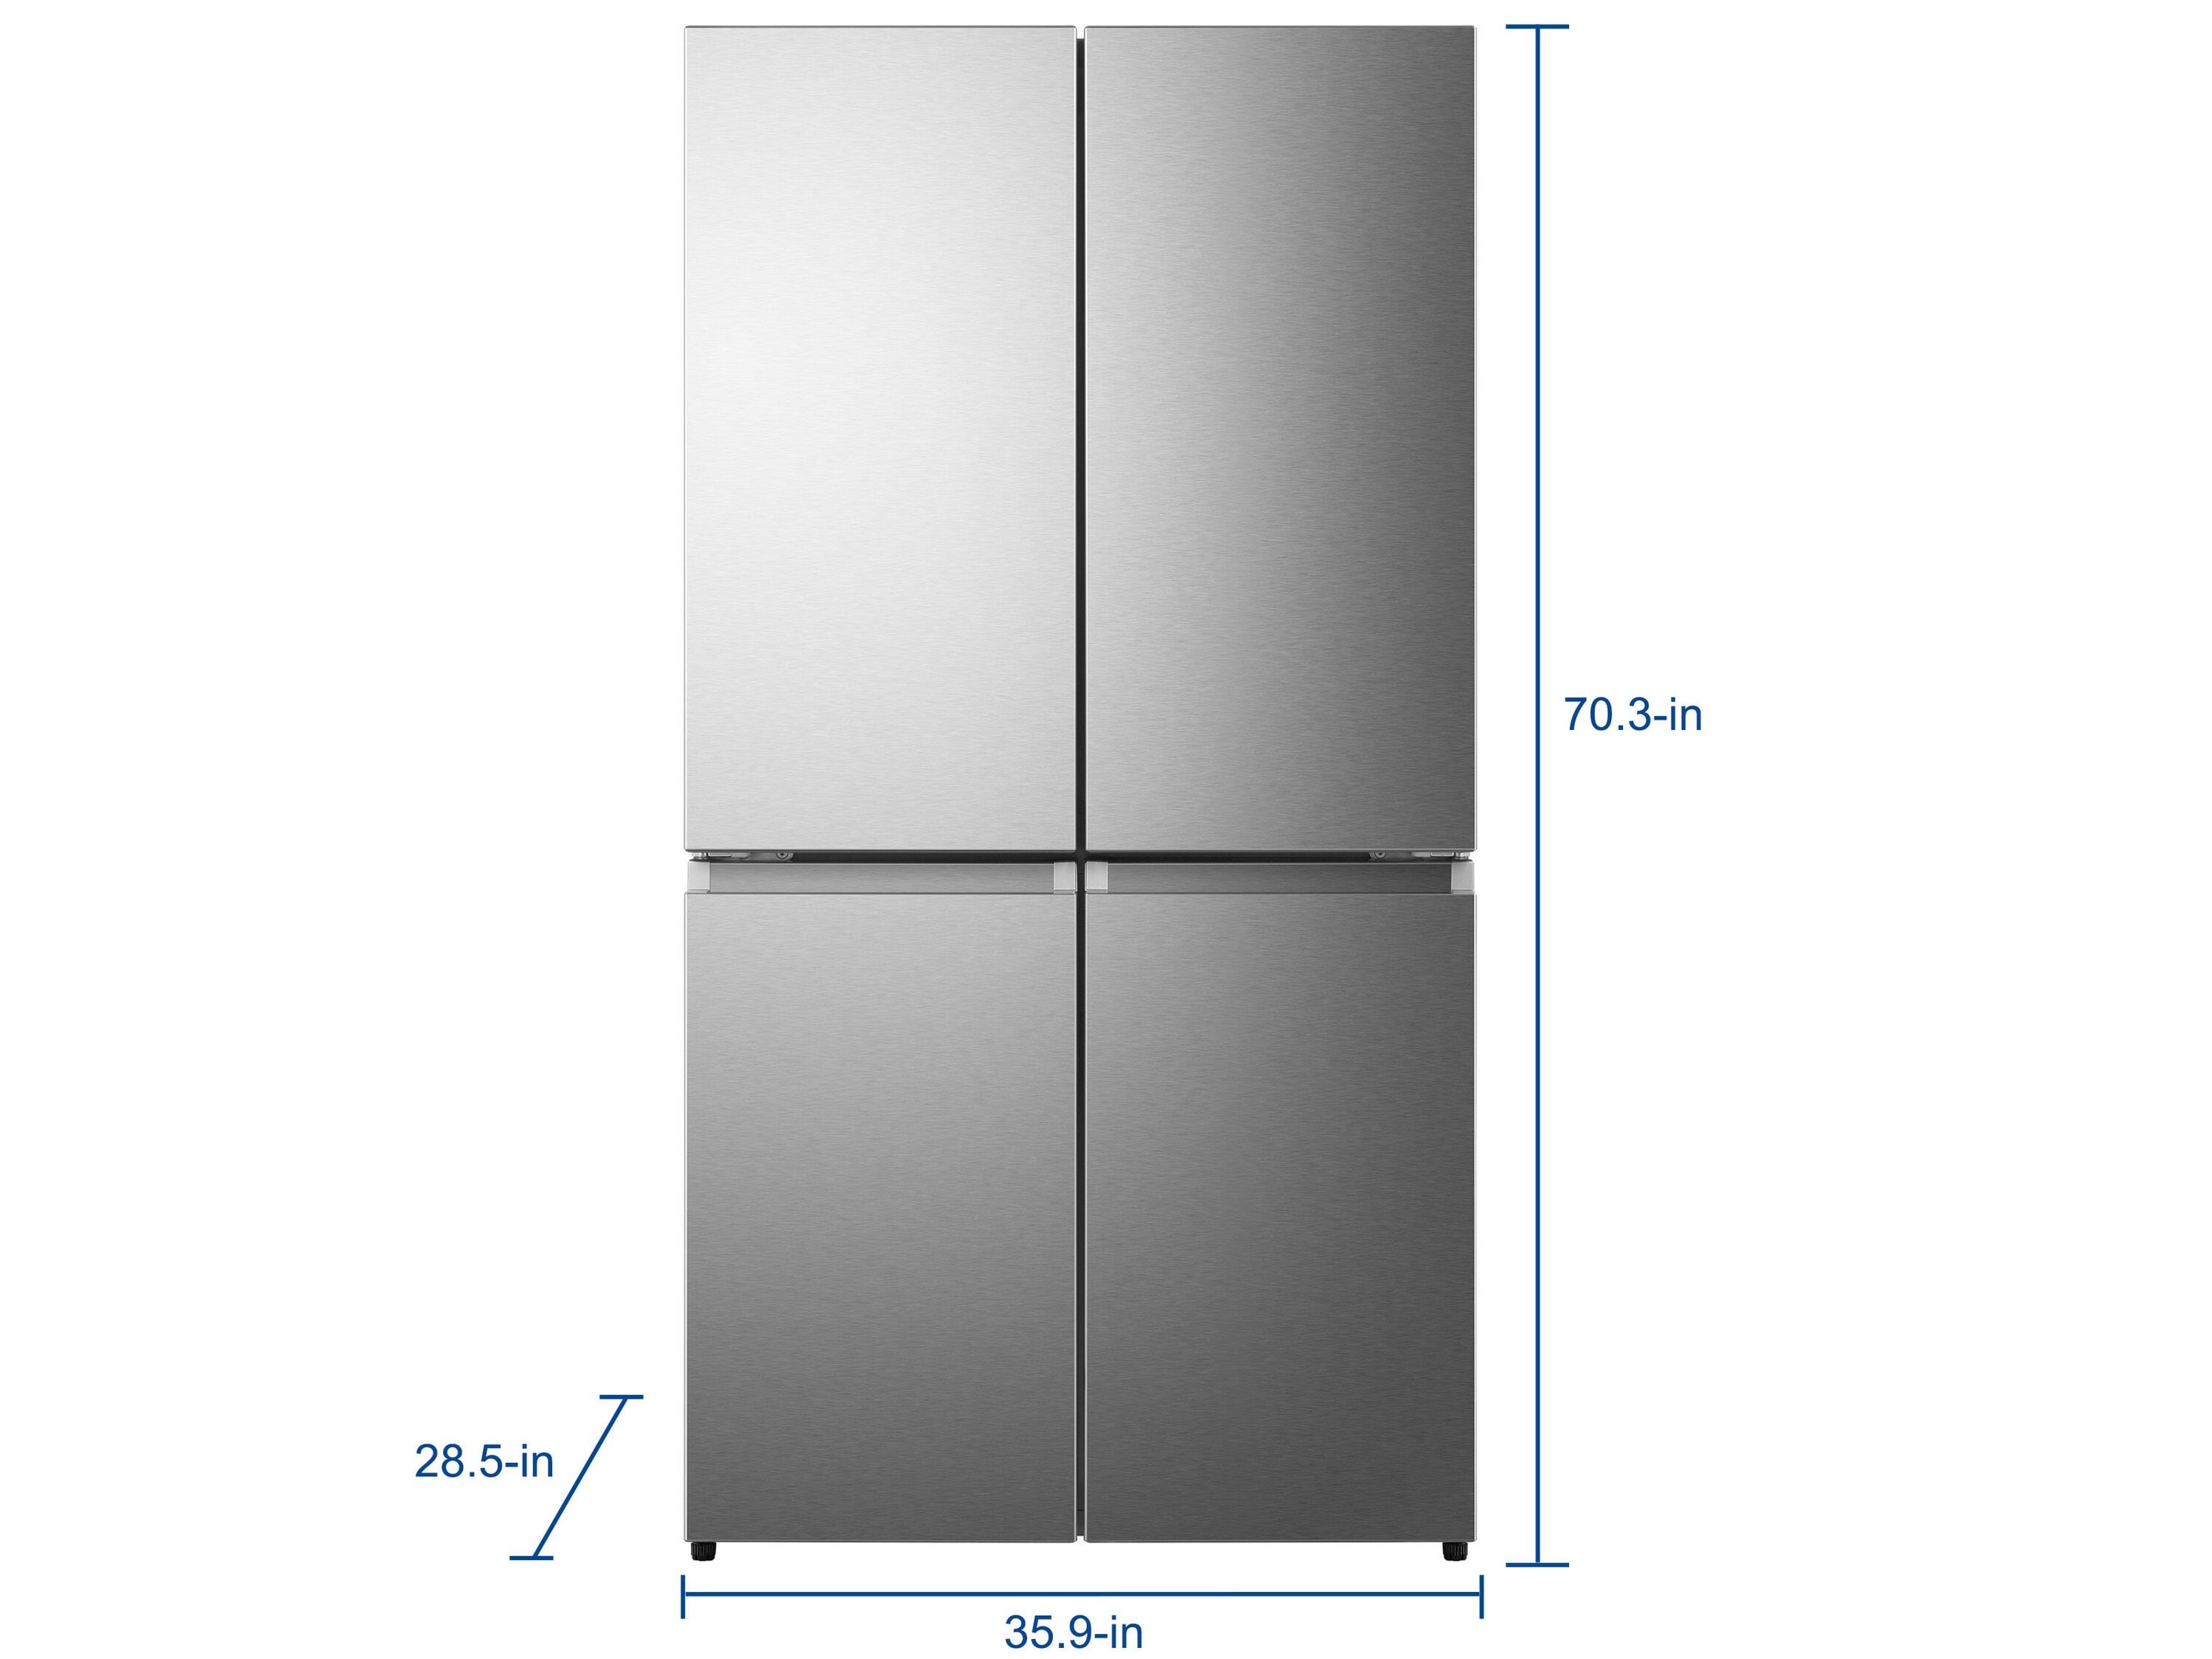 Hisense 21.6-cu ft Refrigerator the Look) at French 4-Door Door French department Refrigerators Maker in (Stainless Door with Counter-depth Ice